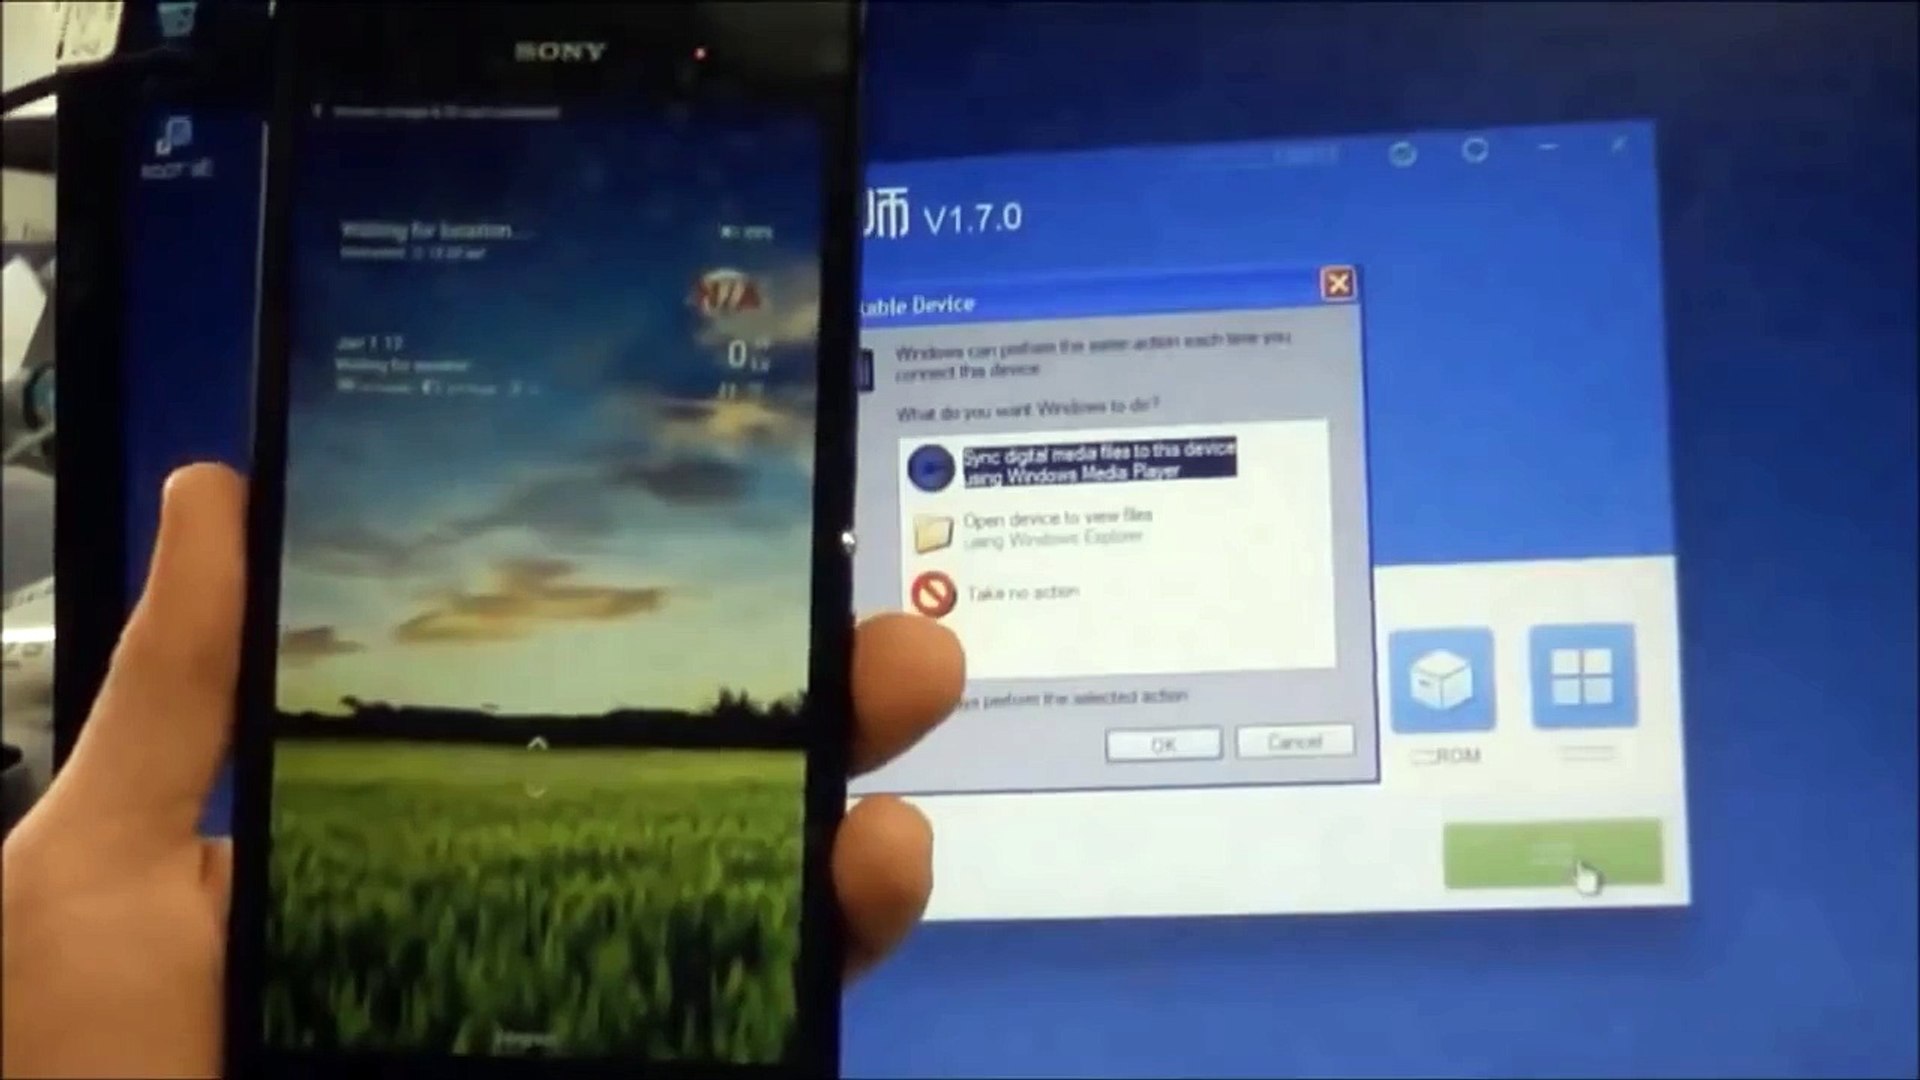 How to Root Sony Xperia Z3 Dual D6633 Easily Step by Step Tutorial - video  Dailymotion